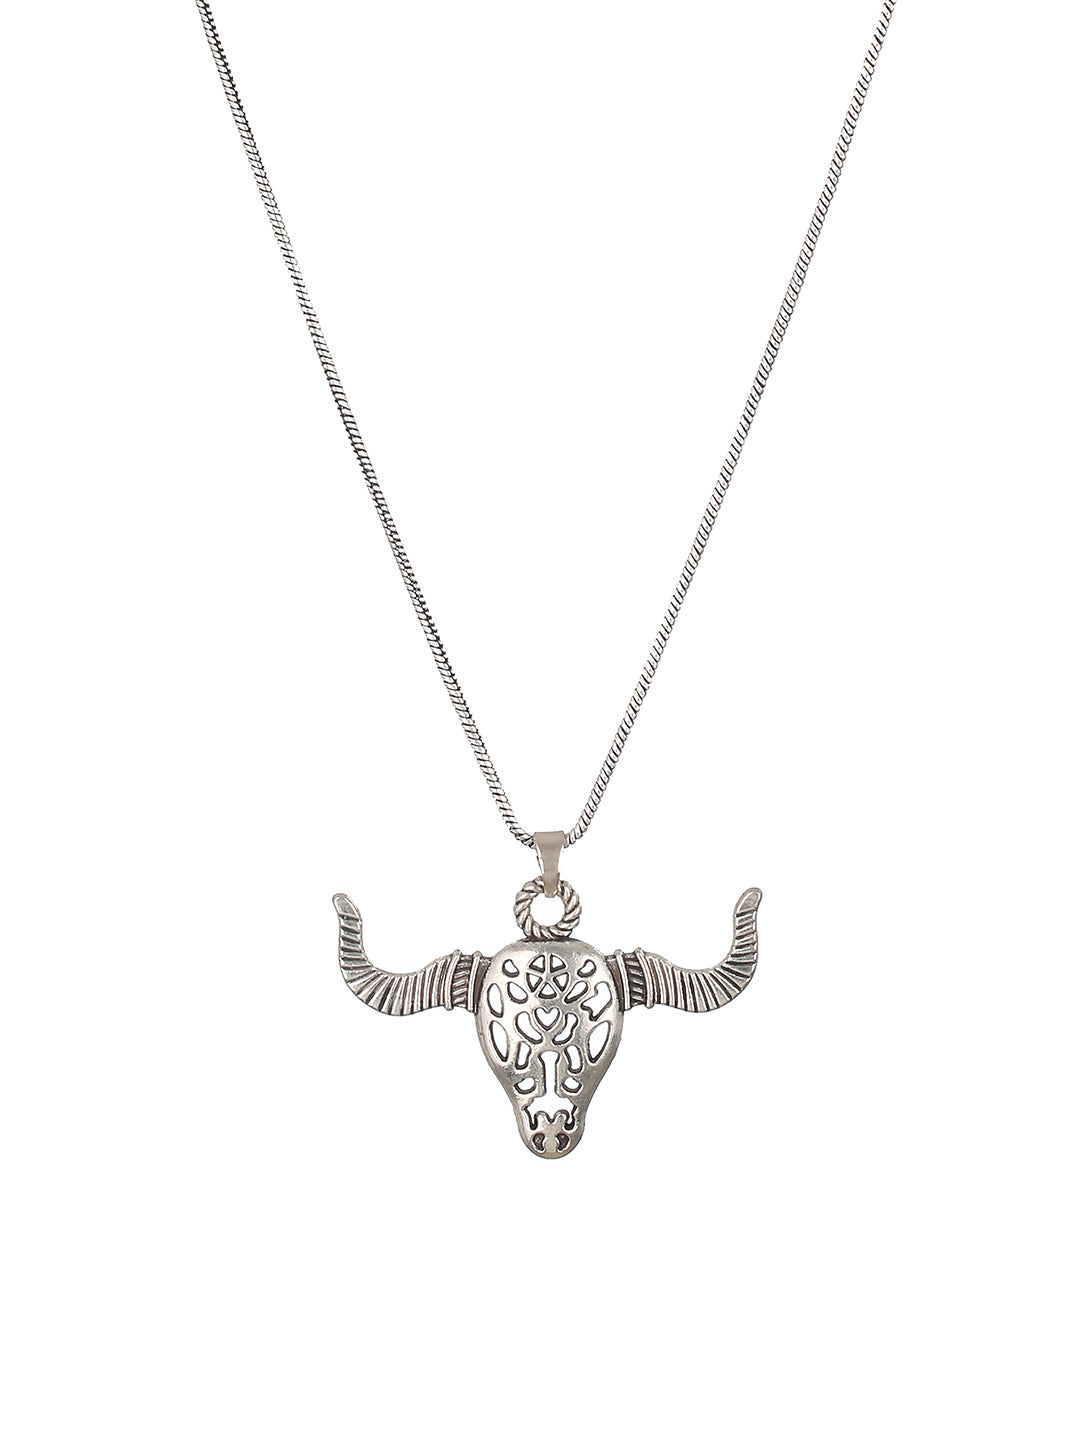 Bold by Priyaasi Bull's Head Silver-Plated Pendant Chain for Men